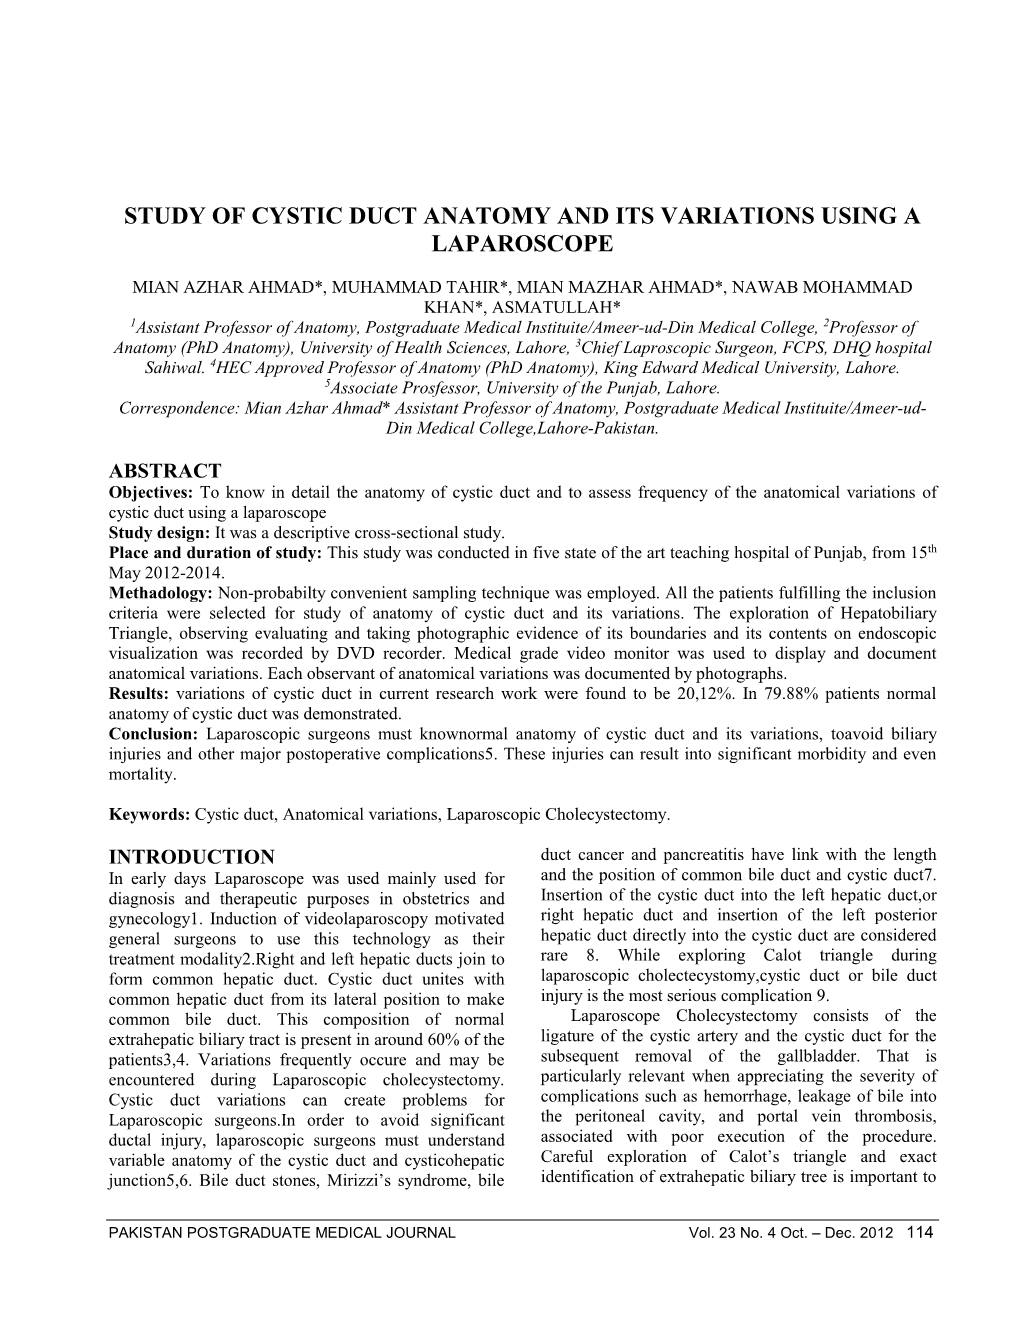 Study of Cystic Duct Anatomy and Its Variations Using a Laparoscope